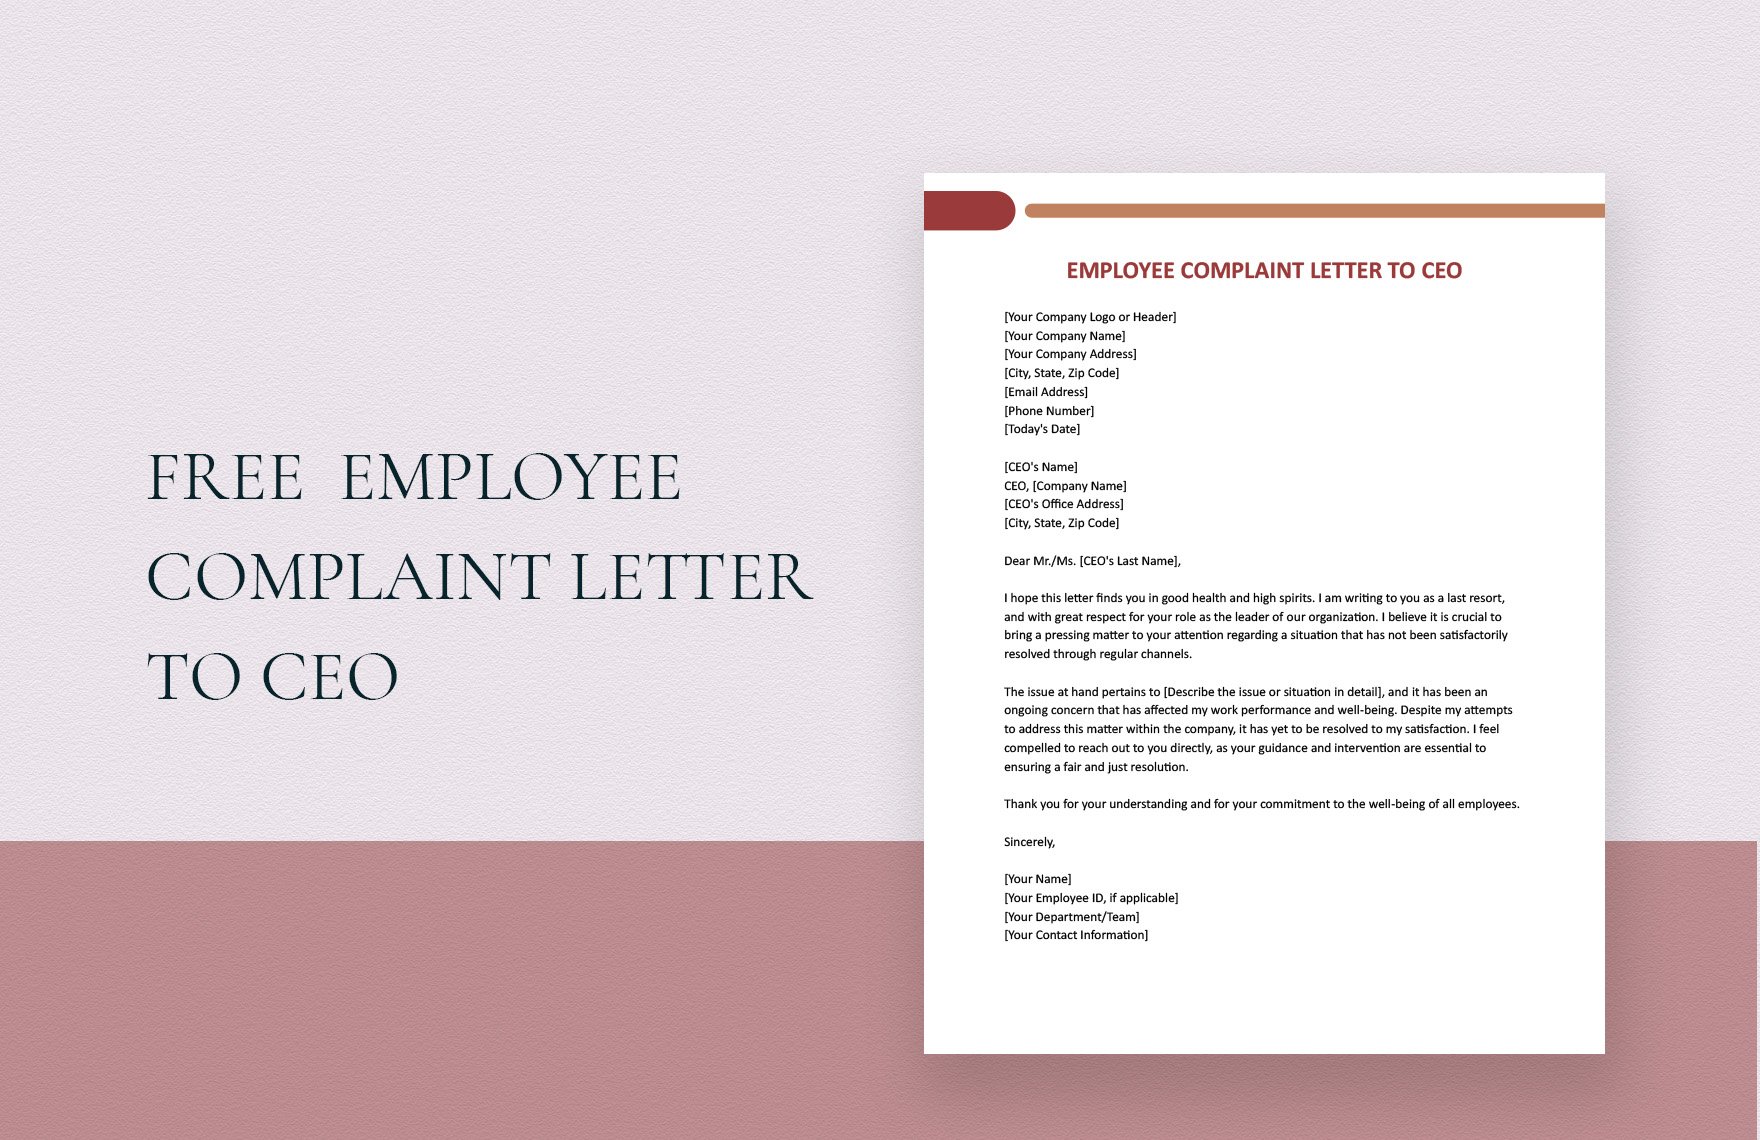 Employee Complaint Letter To Ceo